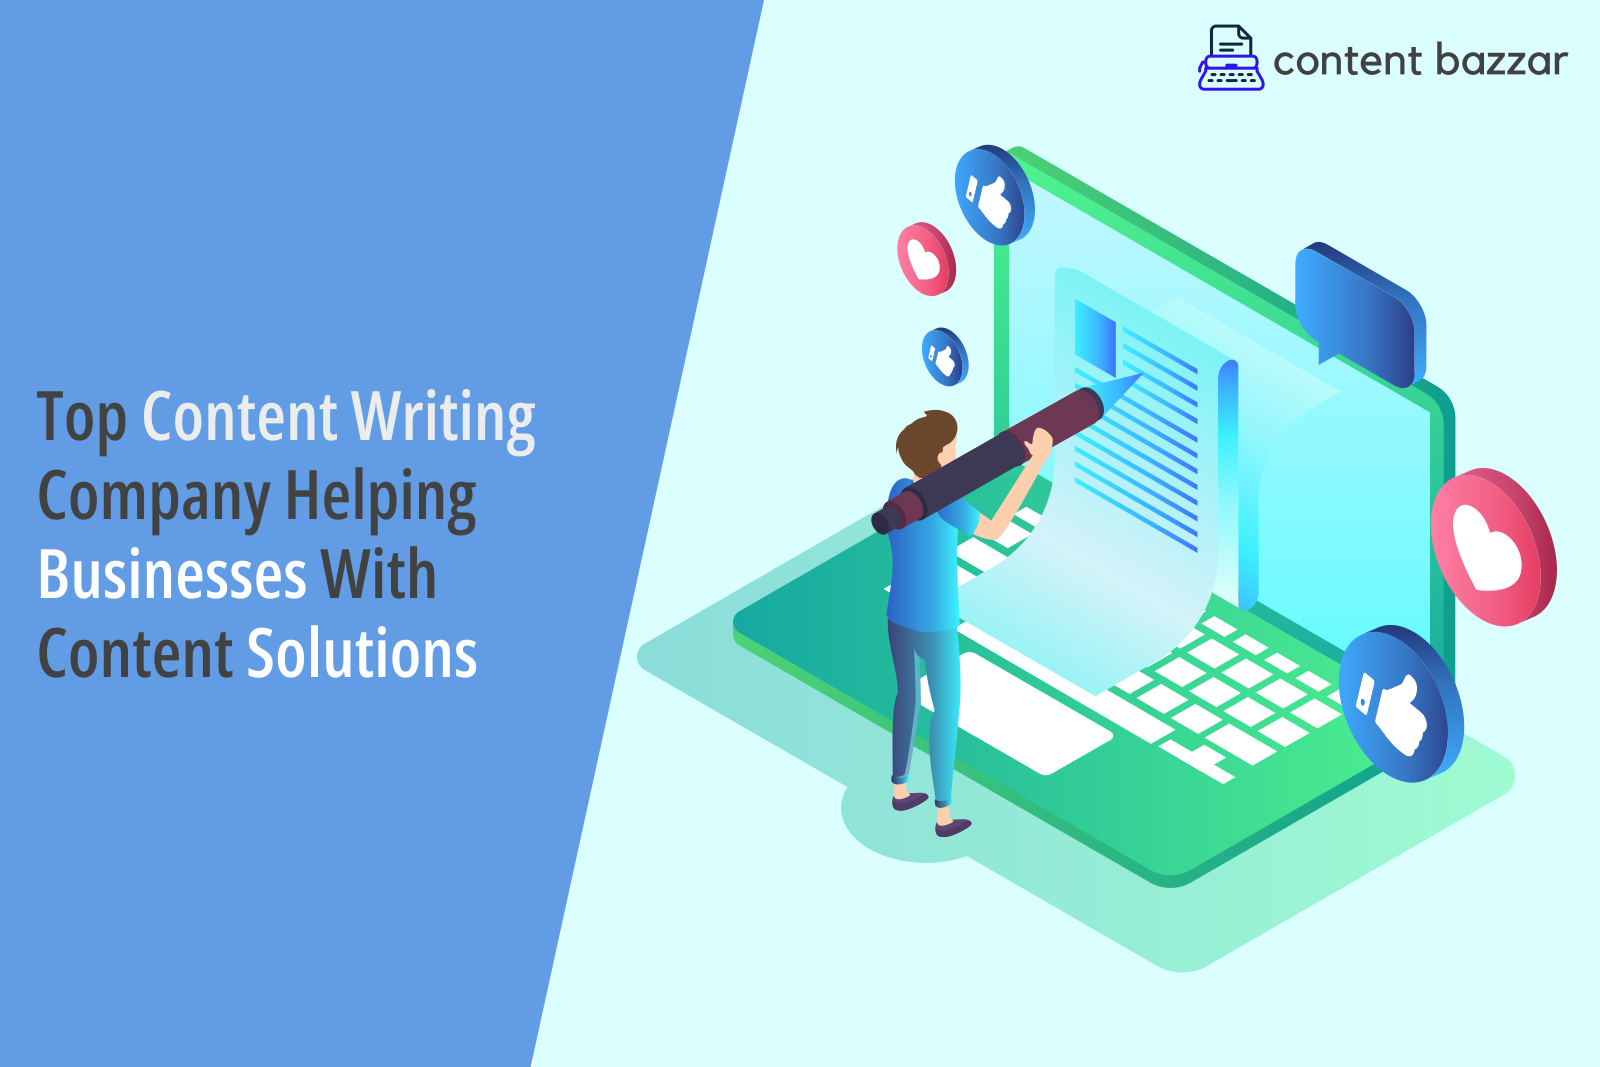 You are currently viewing Top Content Writing Company – Content Bazzar Helping Businesses With Content Solutions